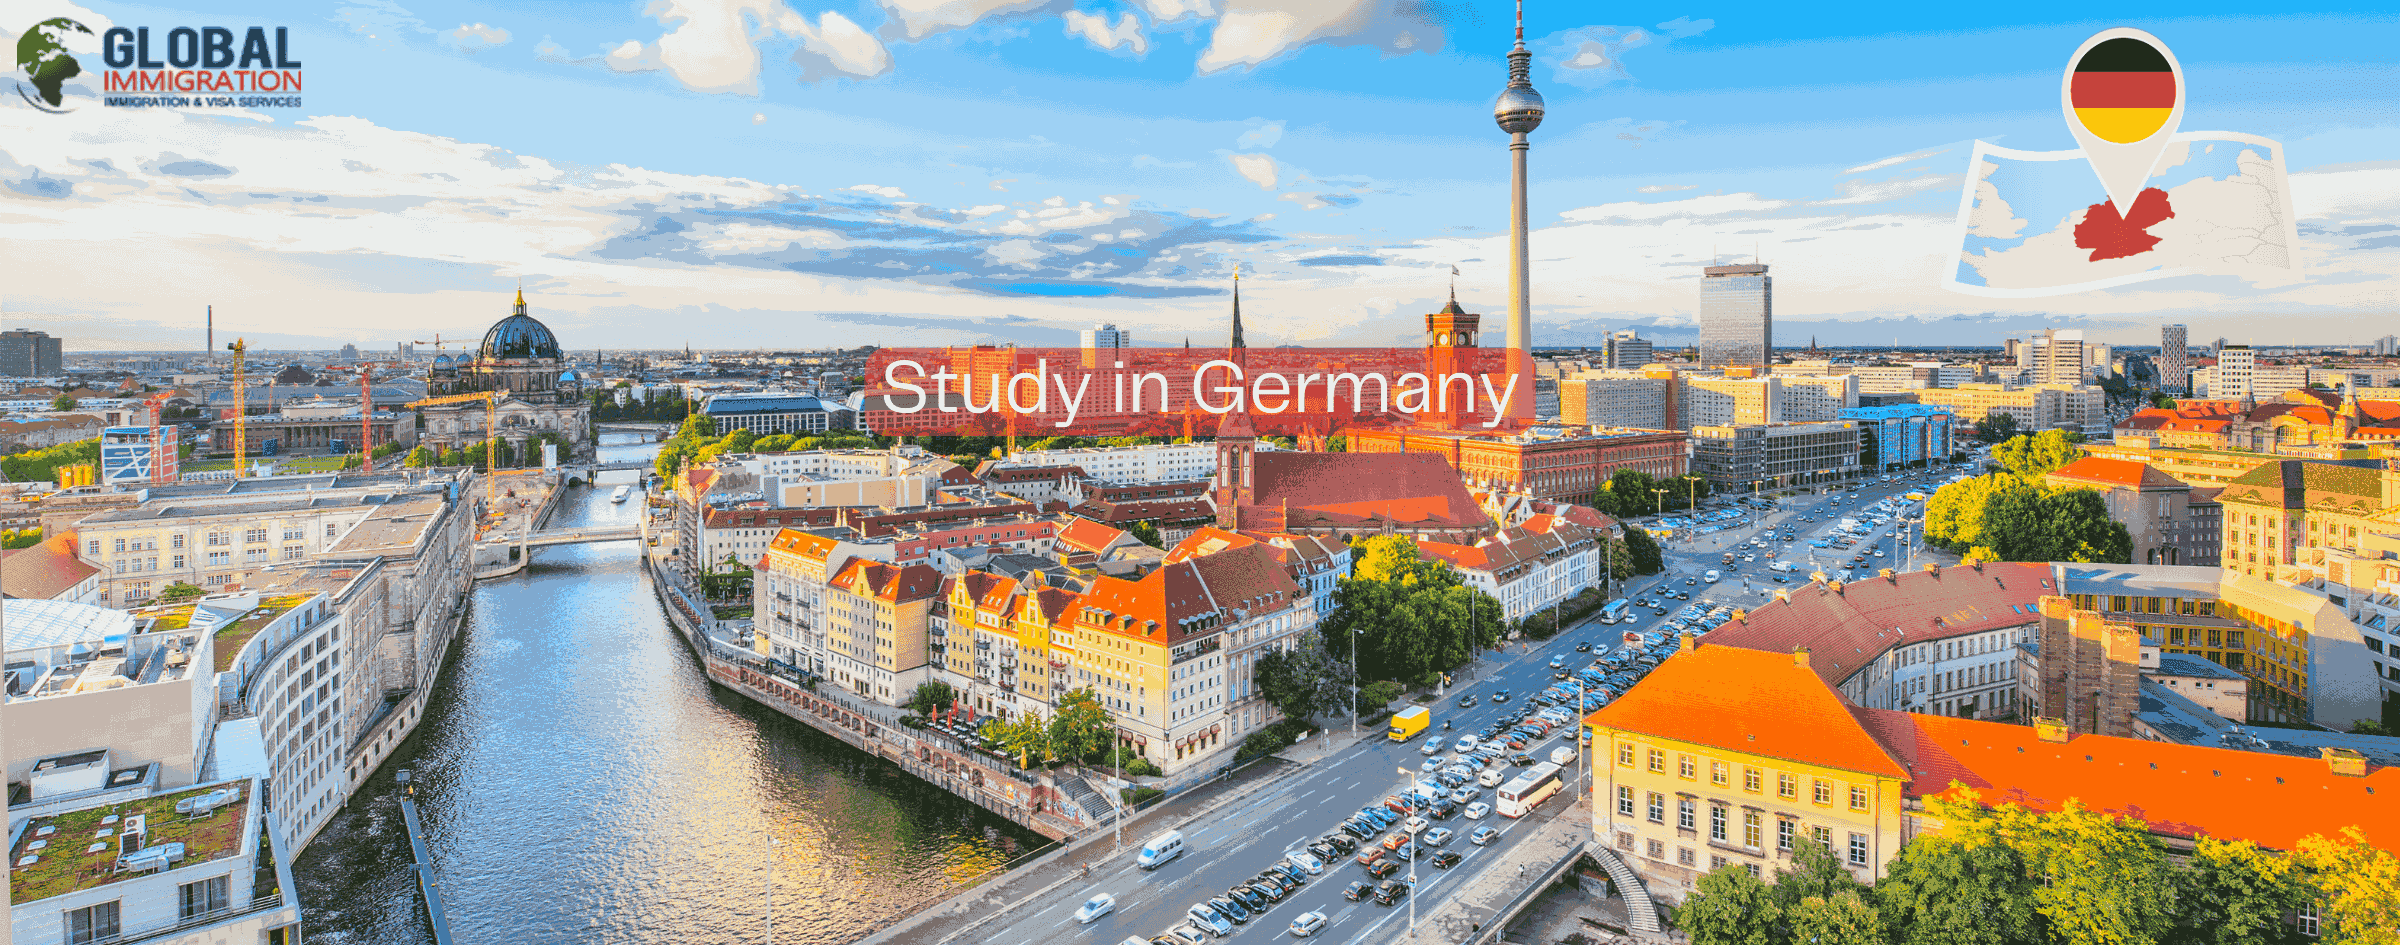 Study In Germany 7289959595